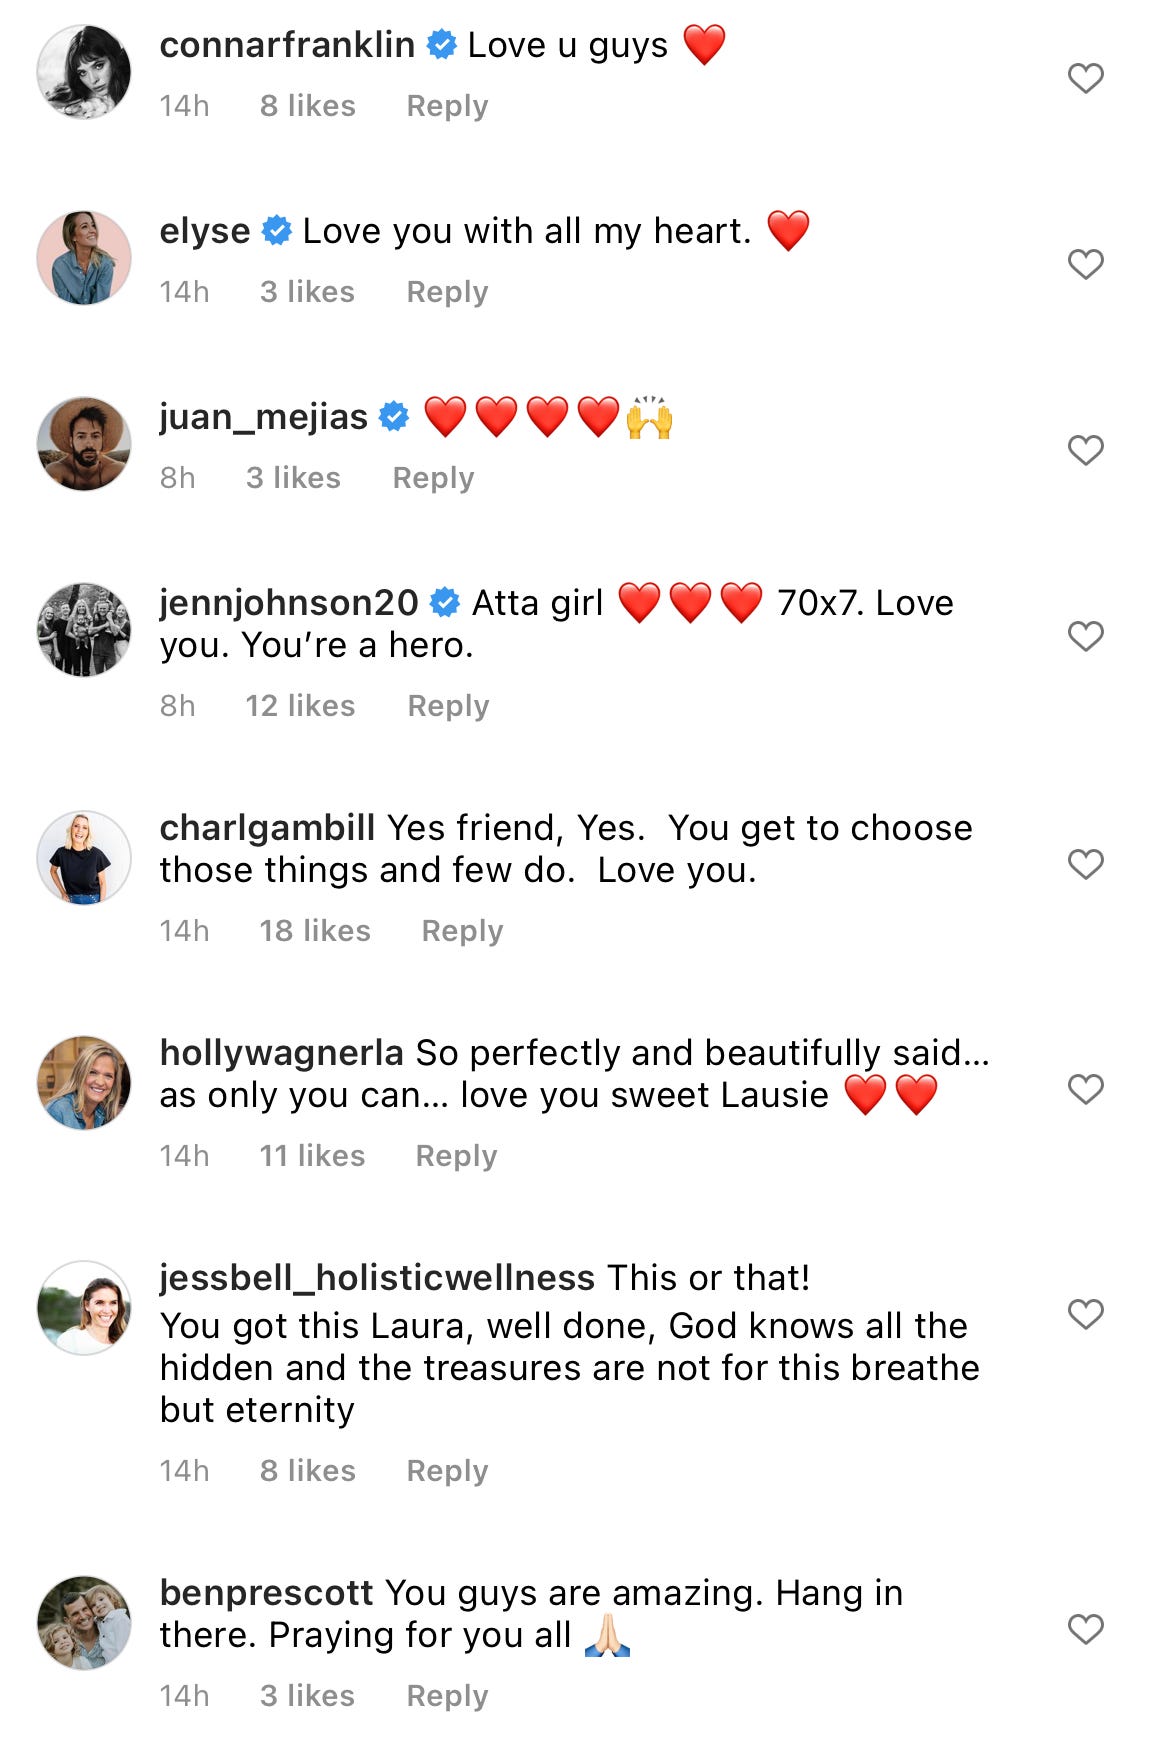 A selection of comments on her post - "Love you - you're a hero"